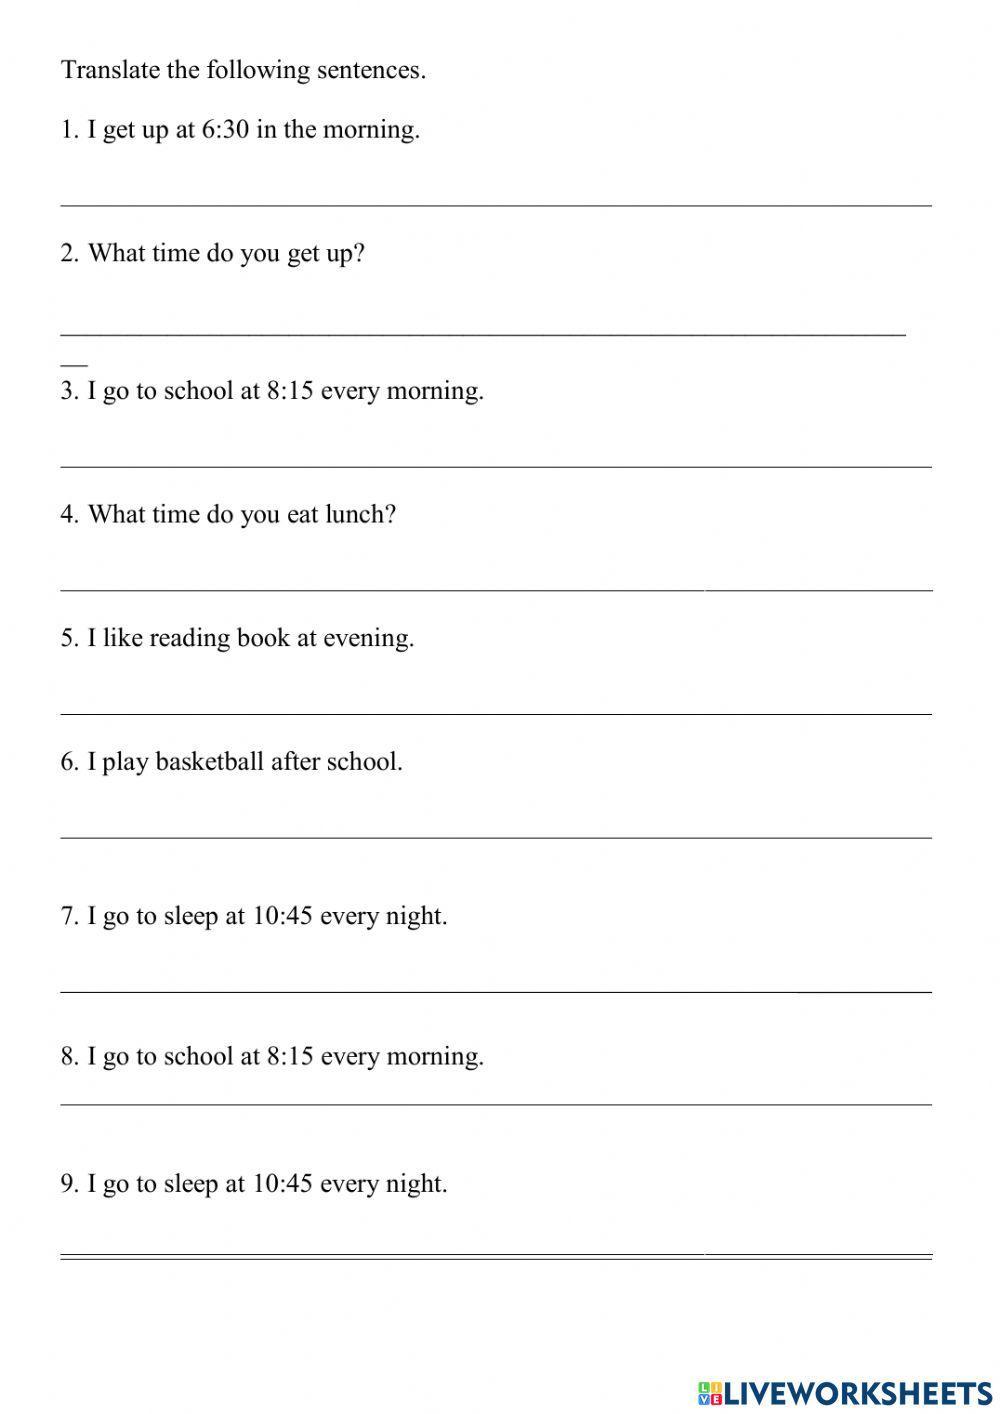 Daily routine worksheet 2